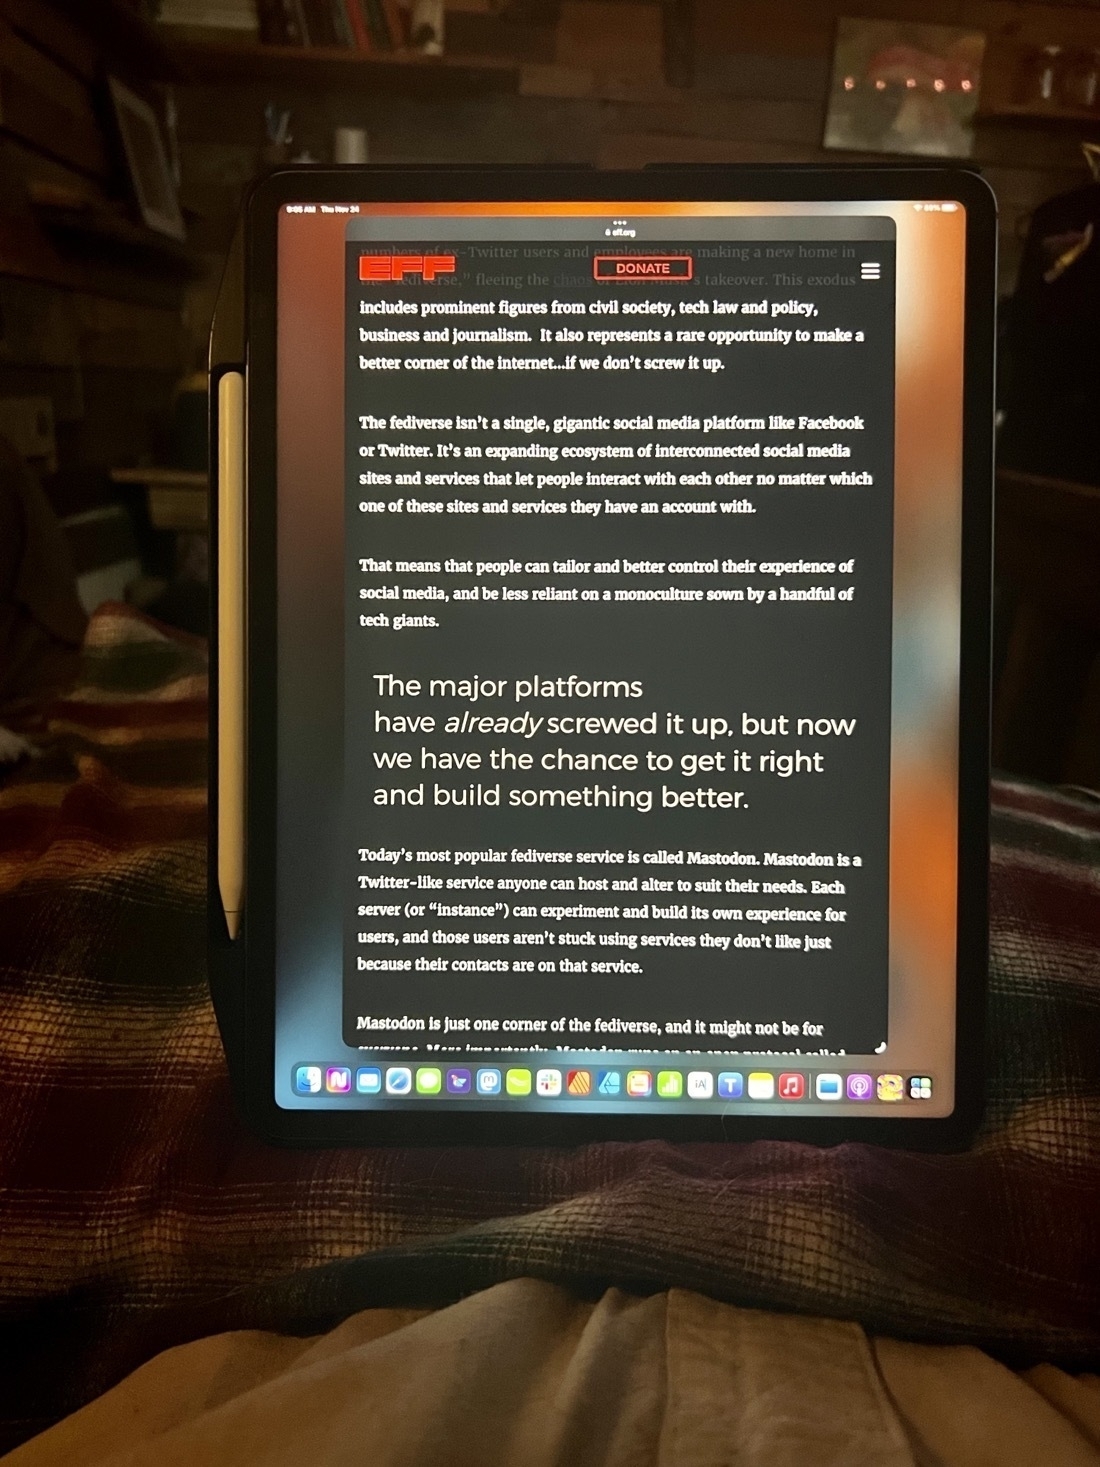 An iPad propped up in portrait mode, photo of backside showing the stand